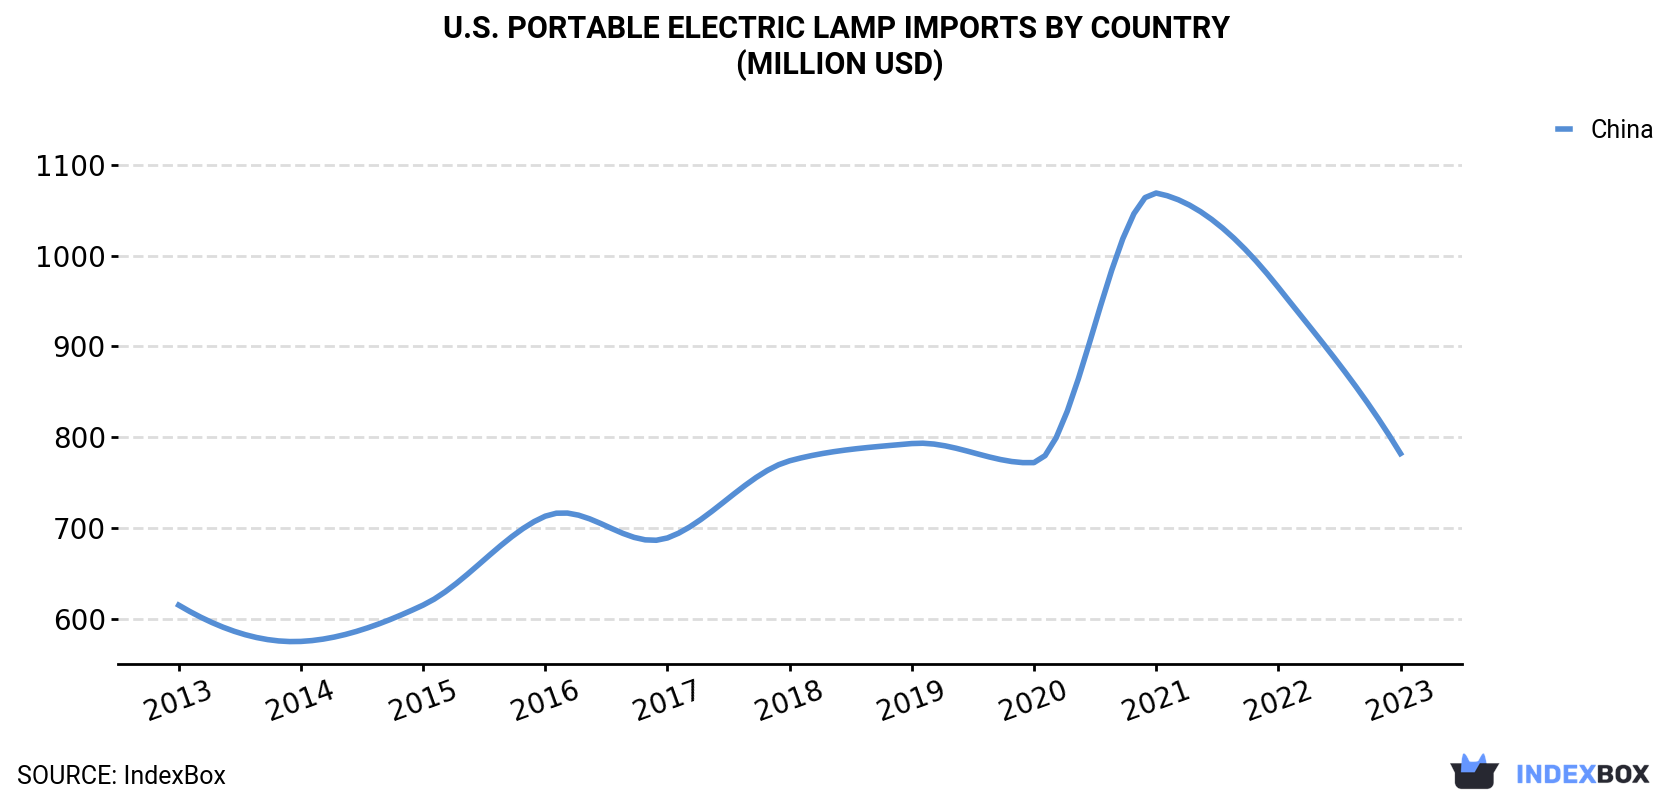 U.S. Portable Electric Lamp Imports By Country (Million USD)